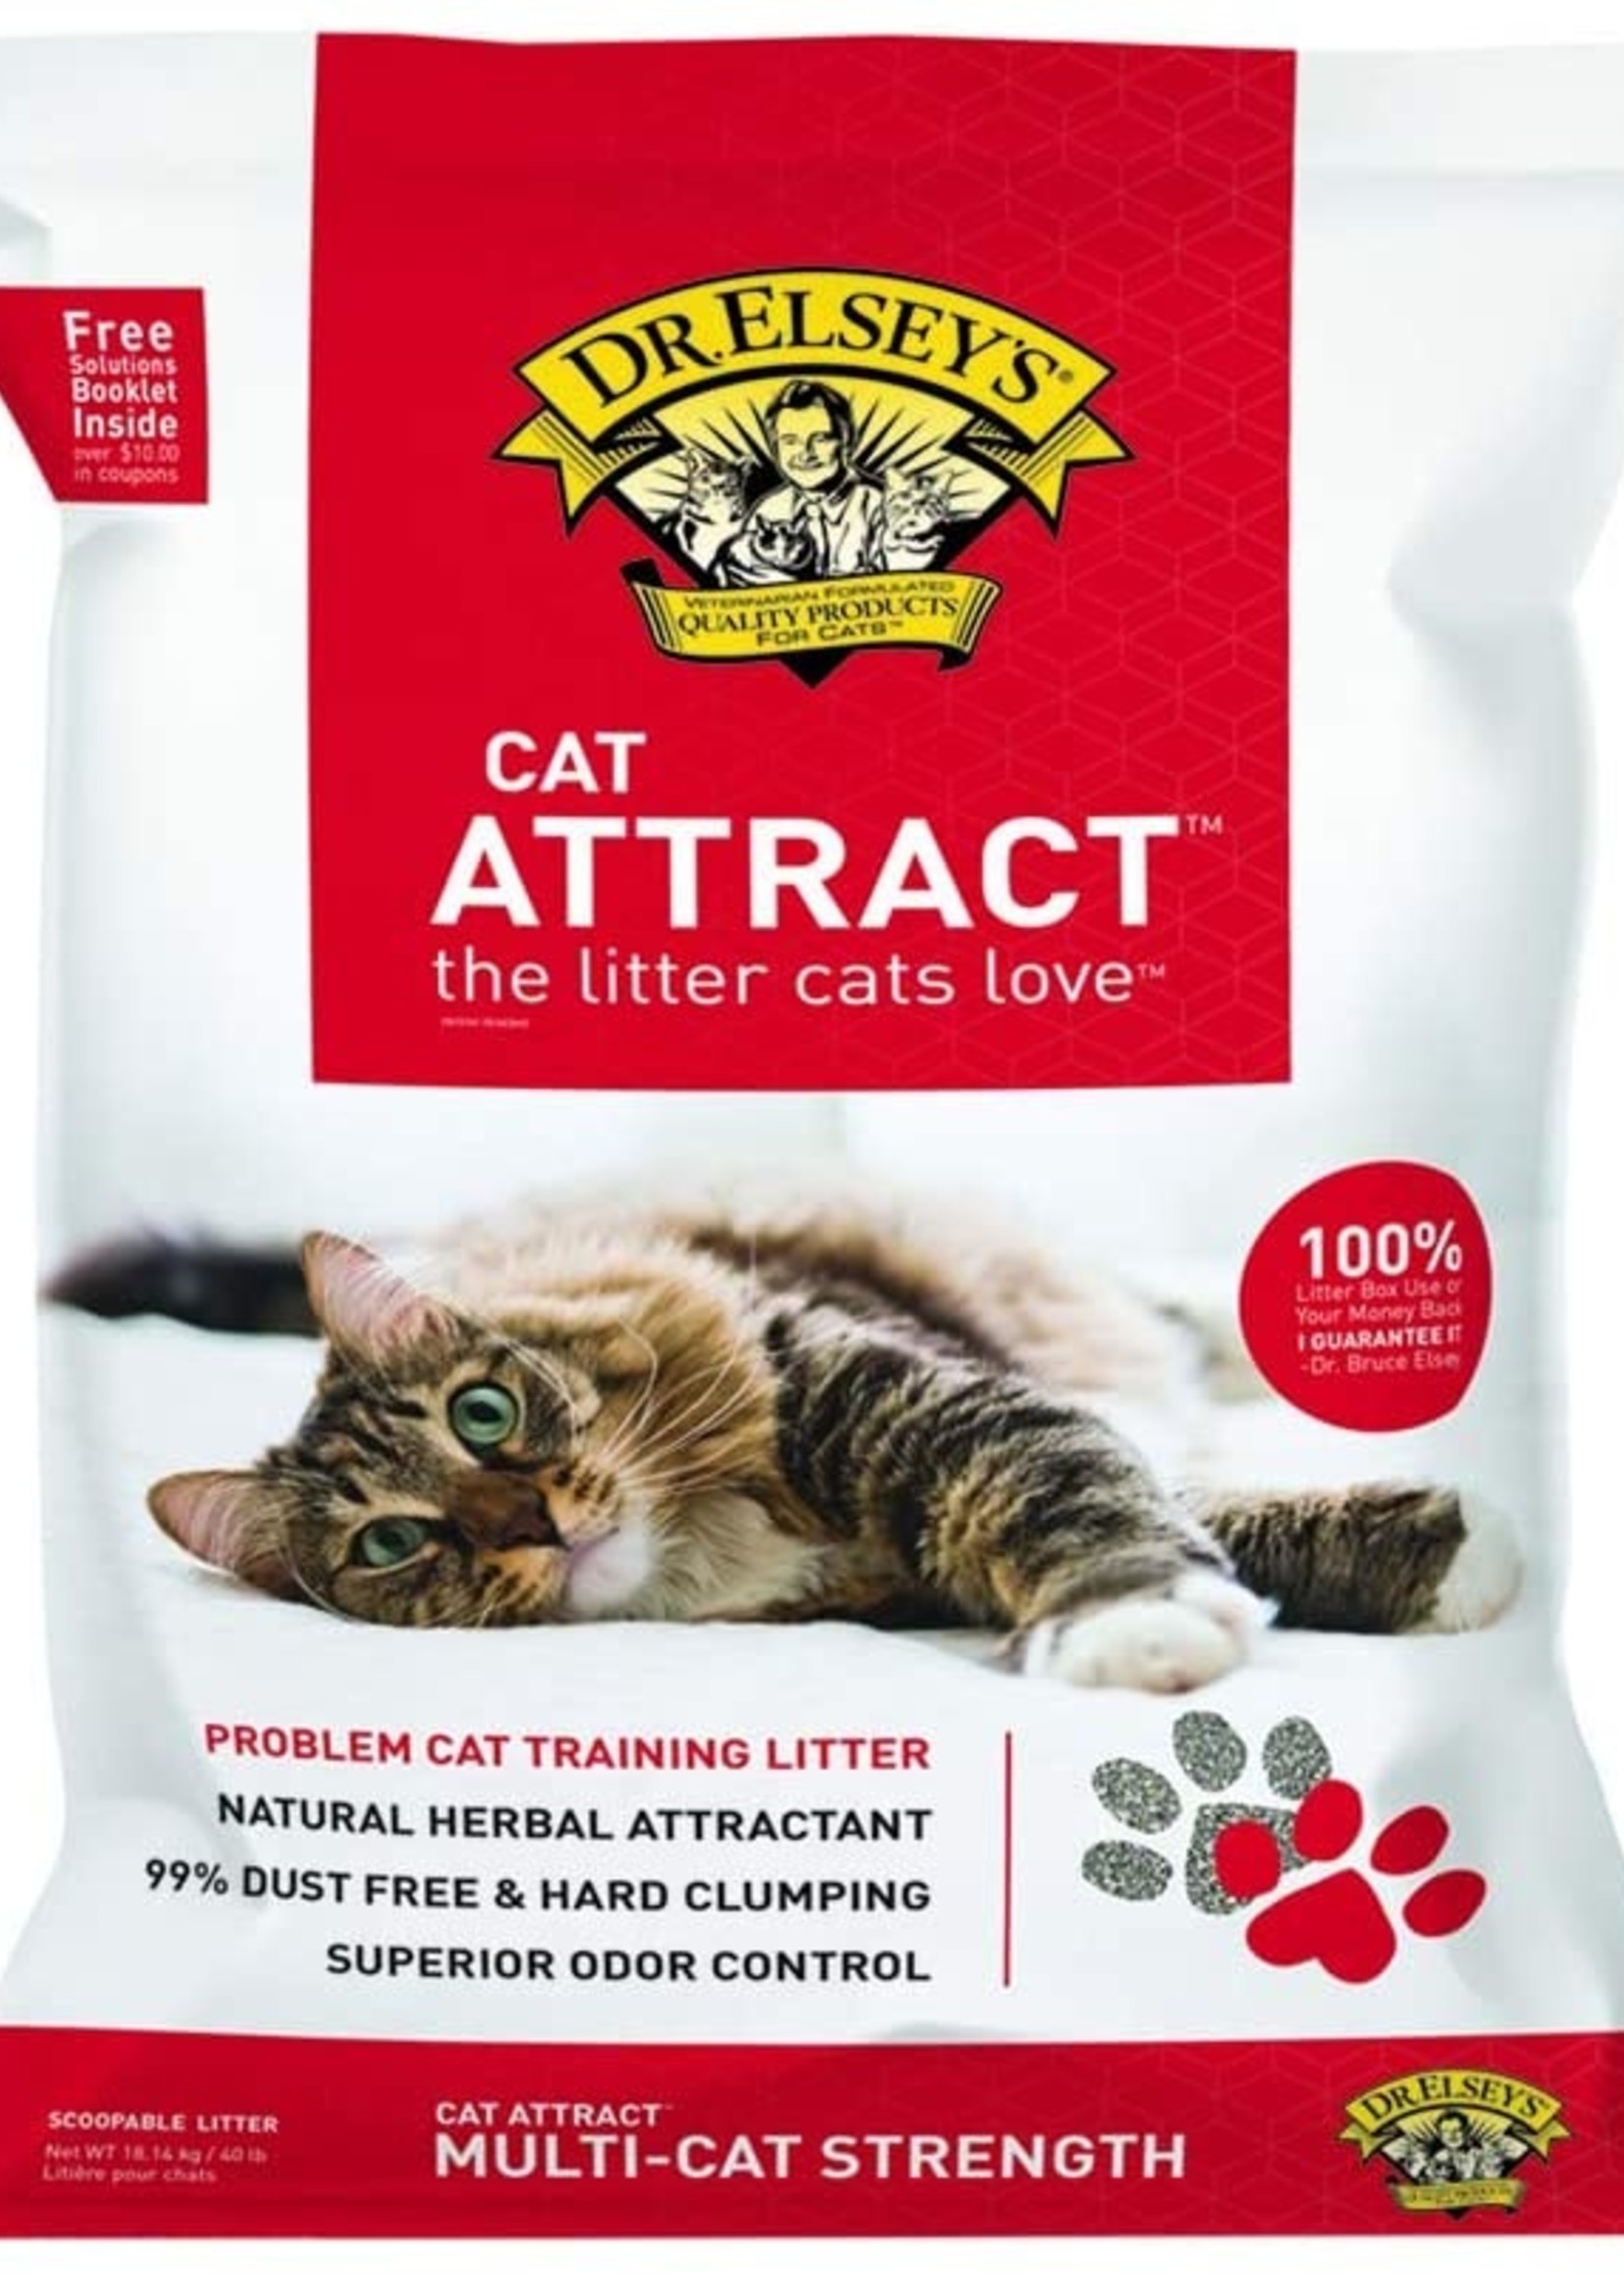 Dr. Elsey Dr. Elsey's Litter Cat Attract 40 lb